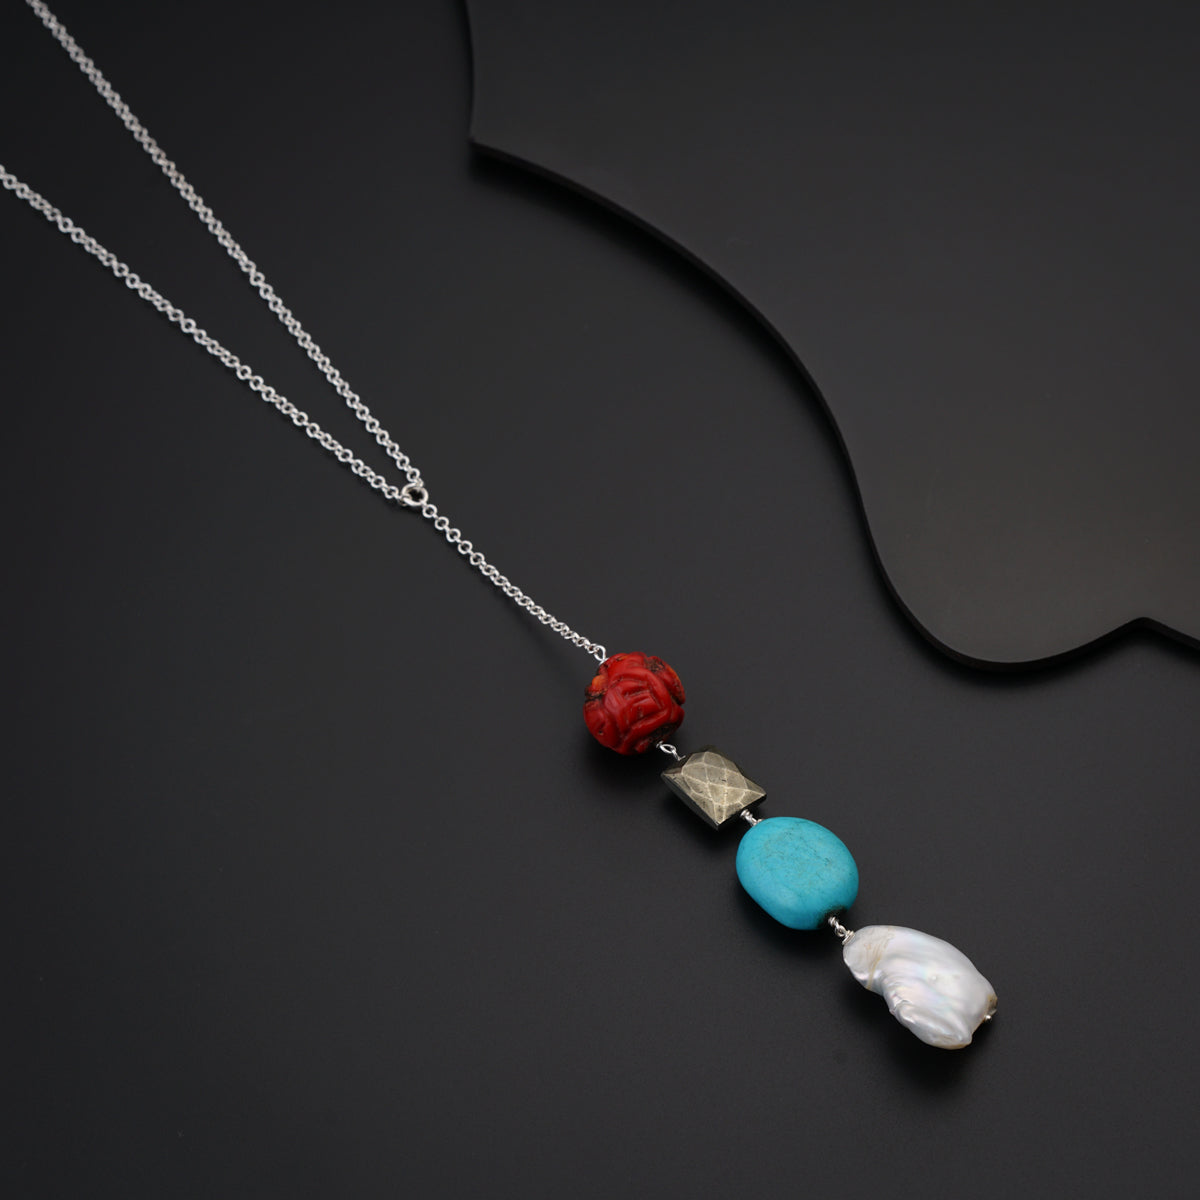 a necklace with a flower and two stones on it